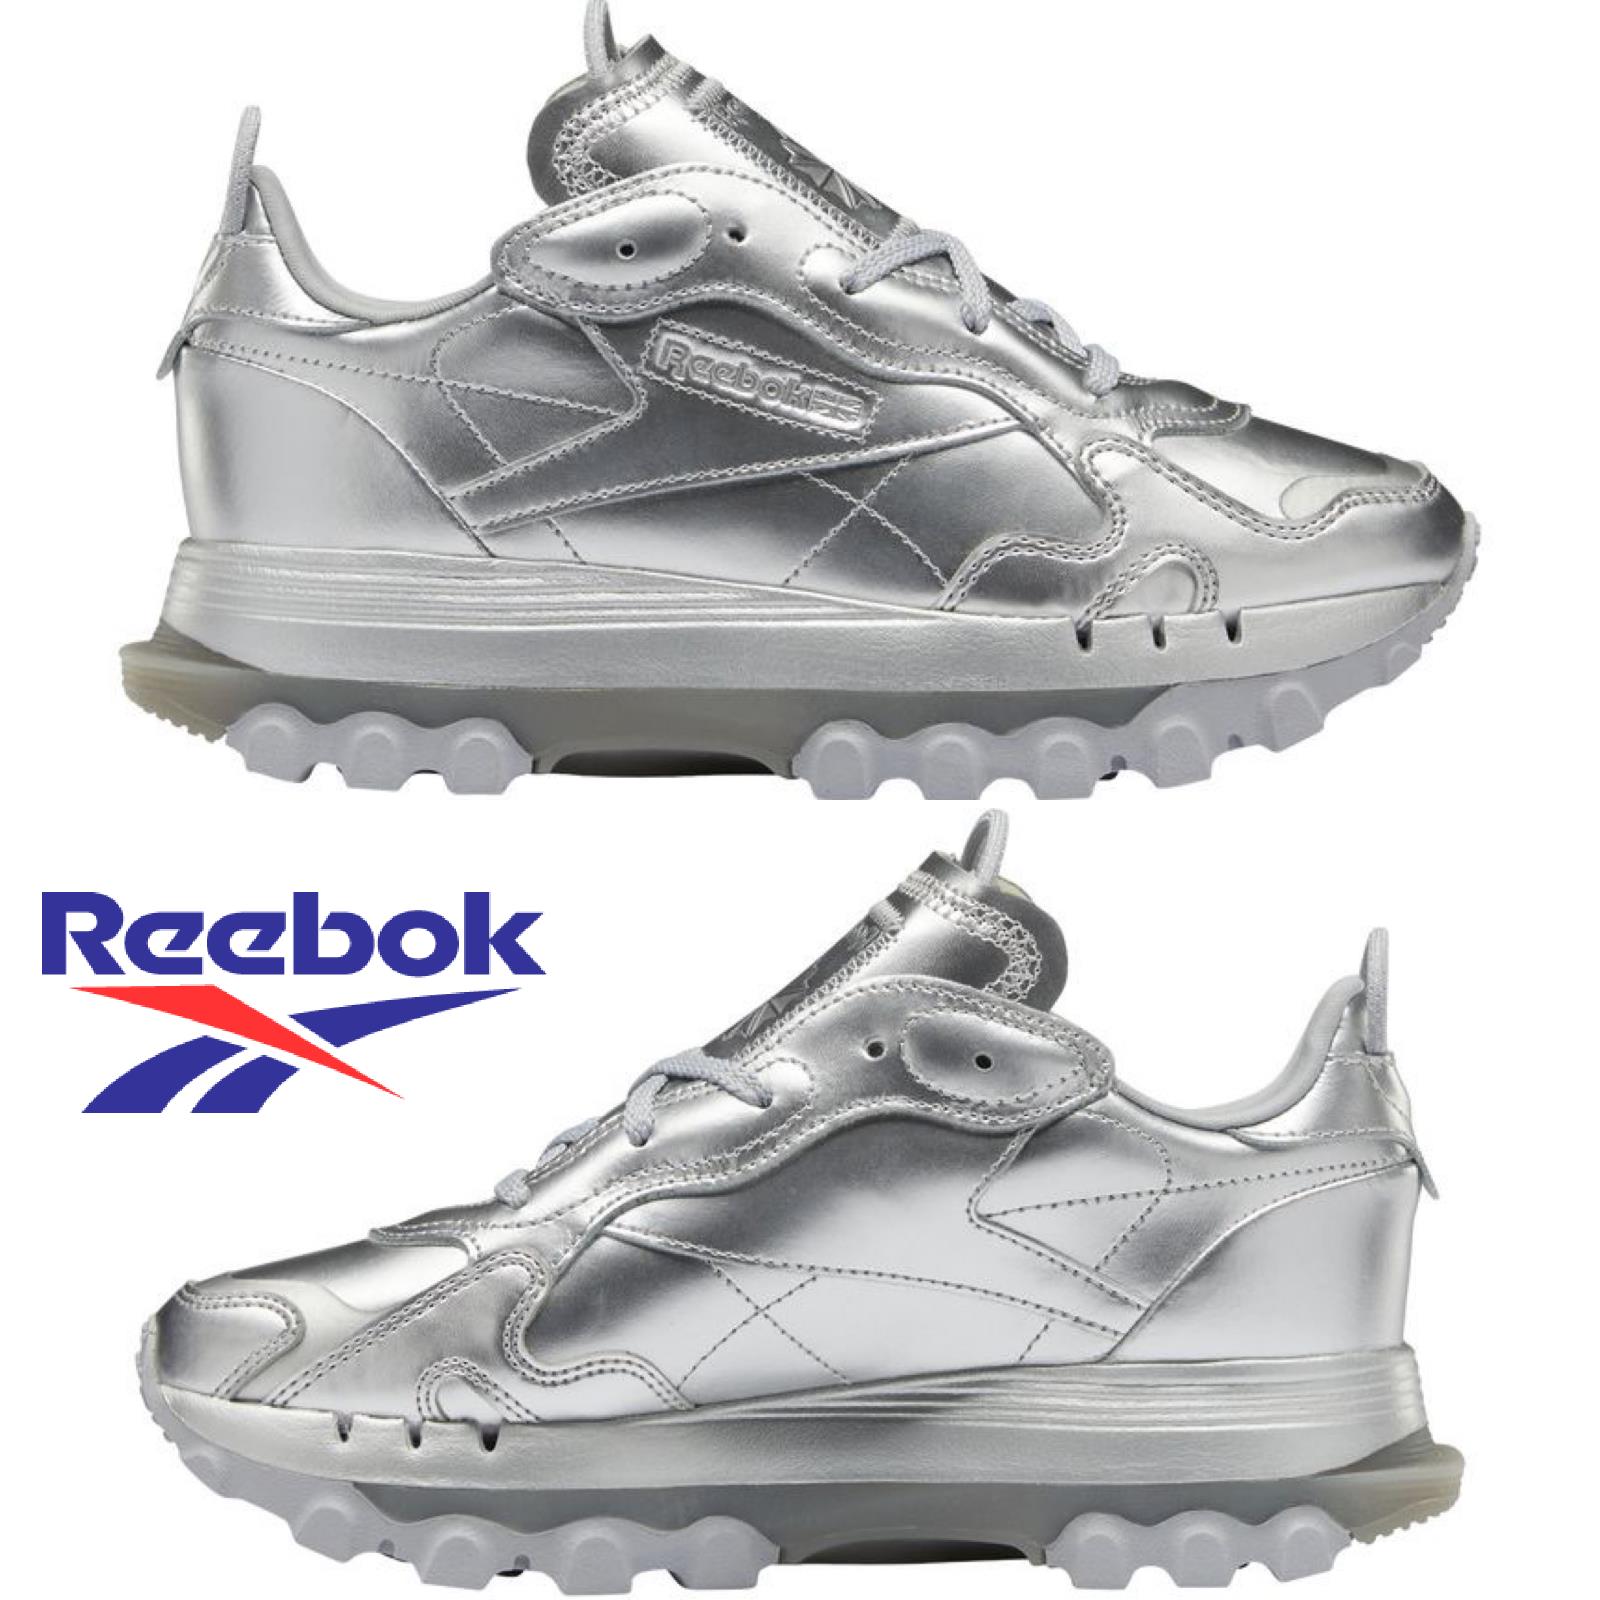 Reebok shoes CLASSIC - Silver , Silver/Silver Manufacturer 5